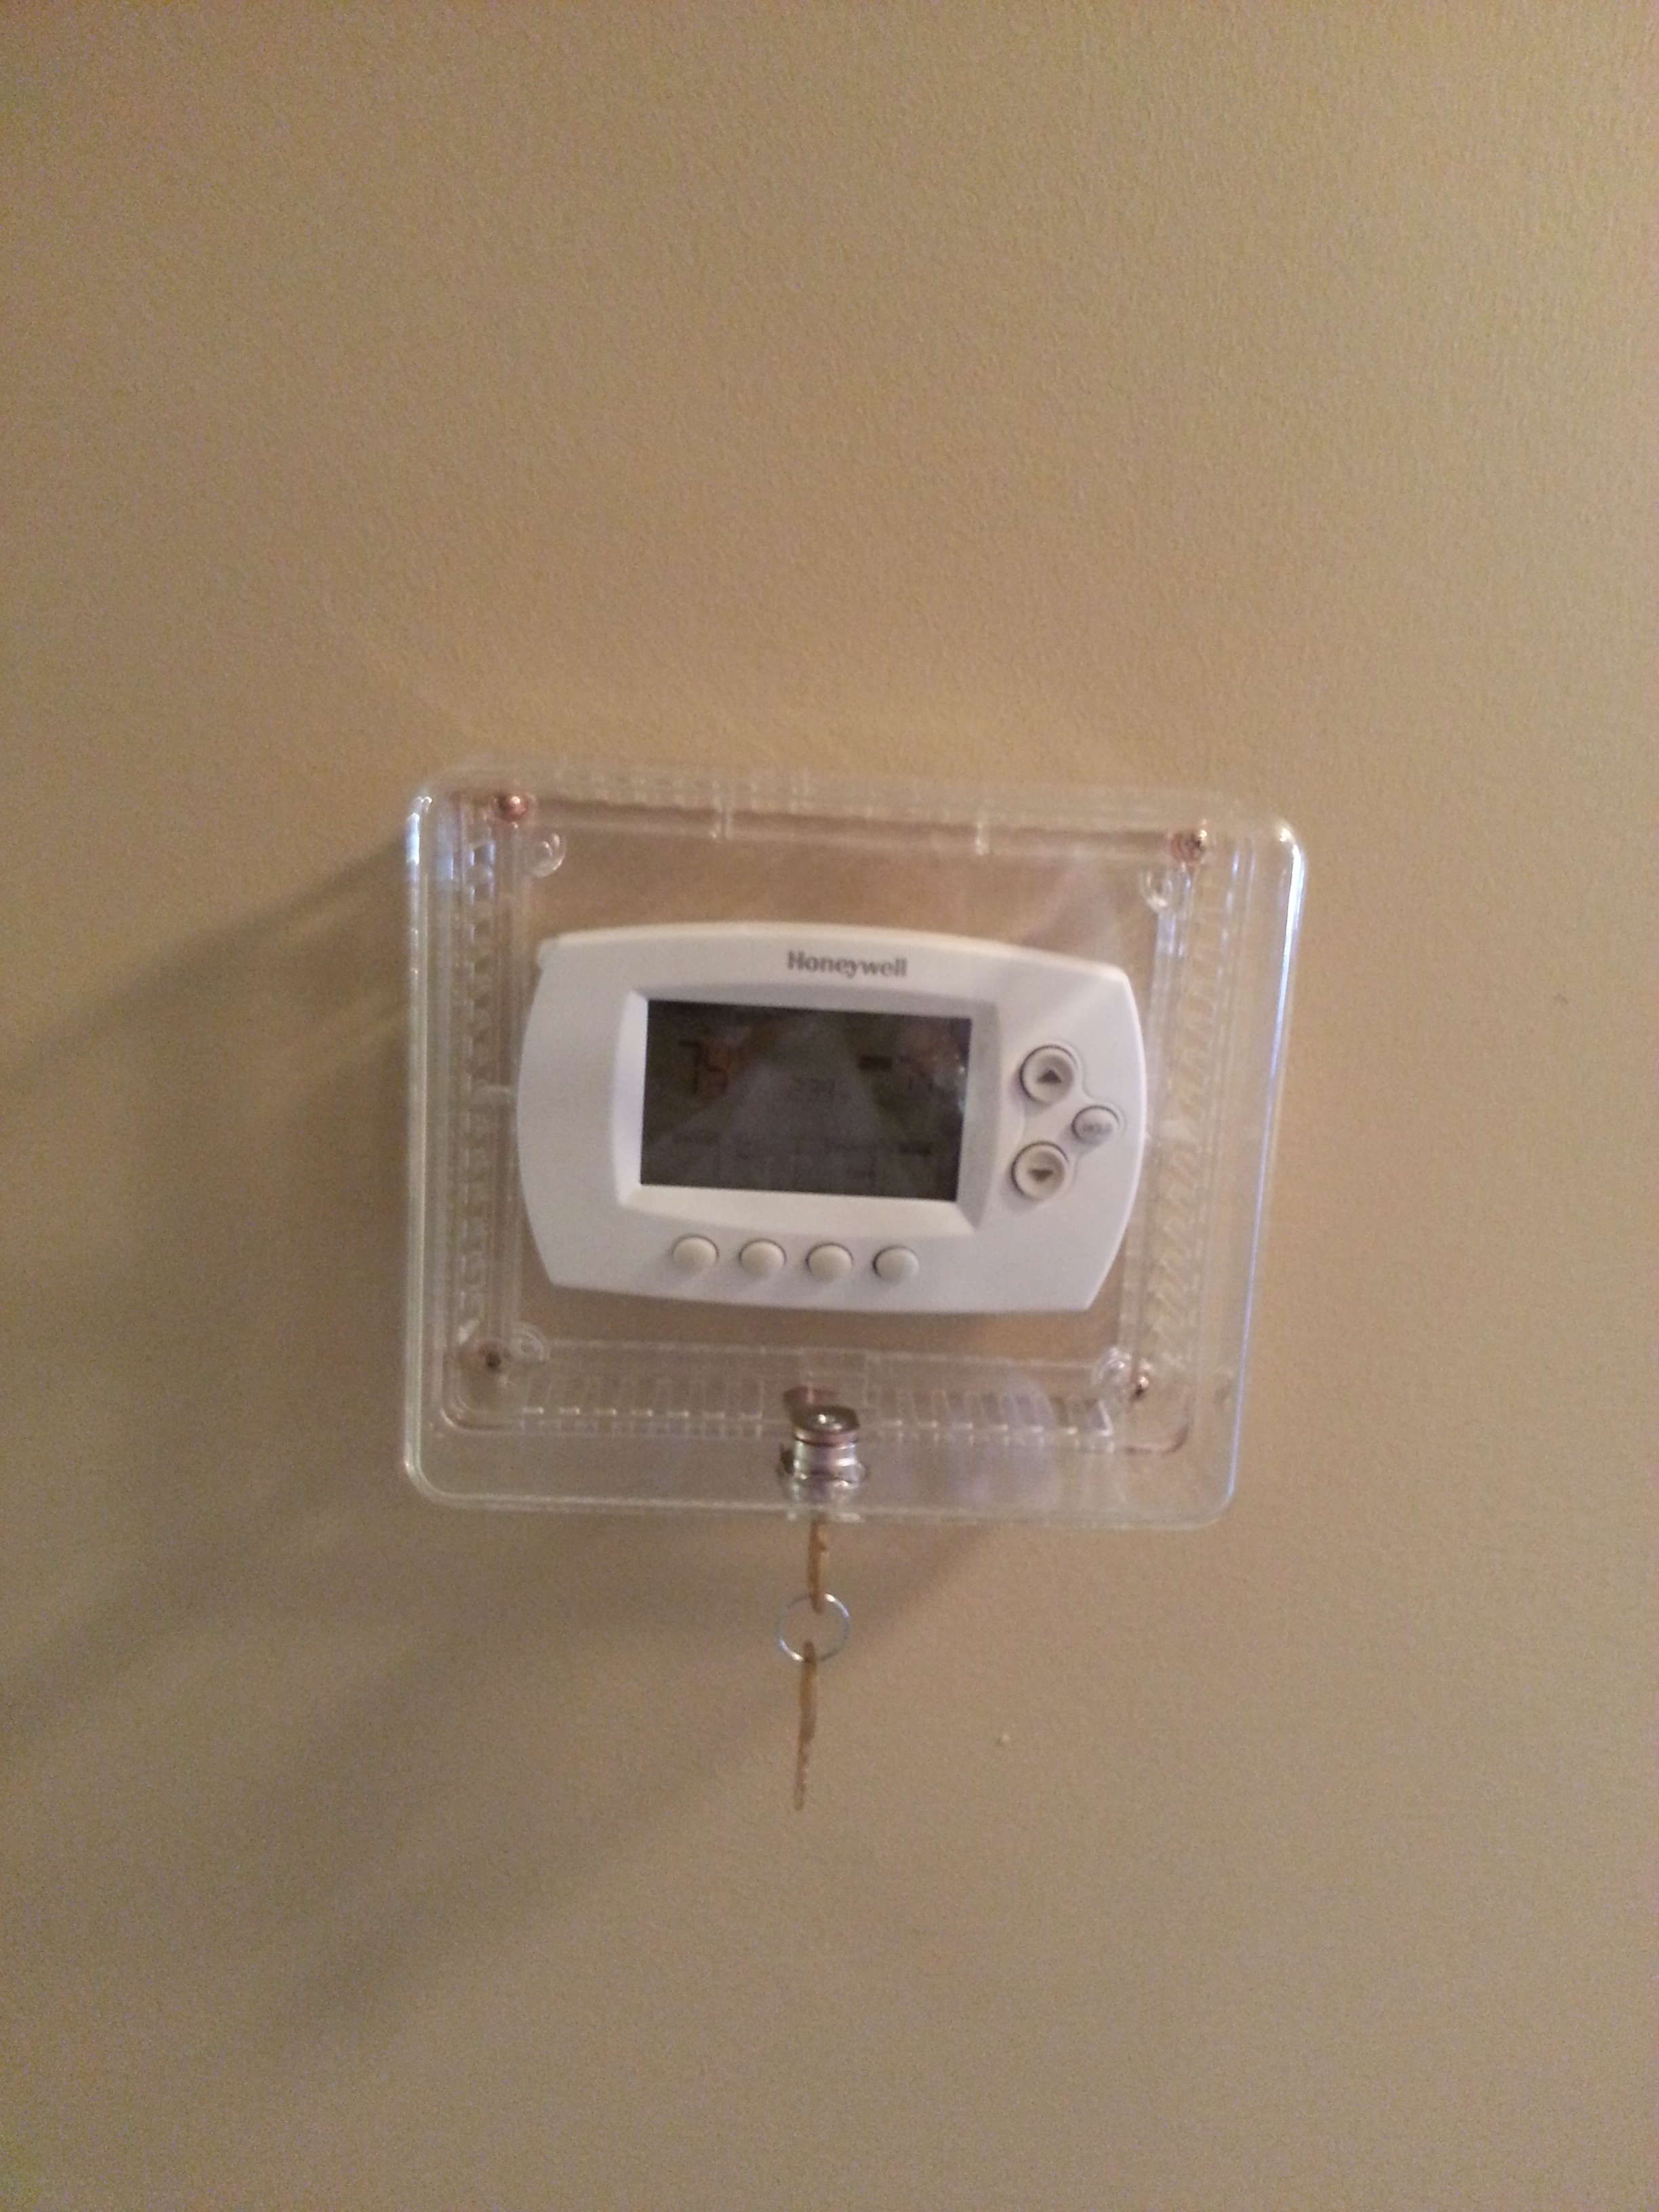 Memory Care Home solutions 2 locked thermostat